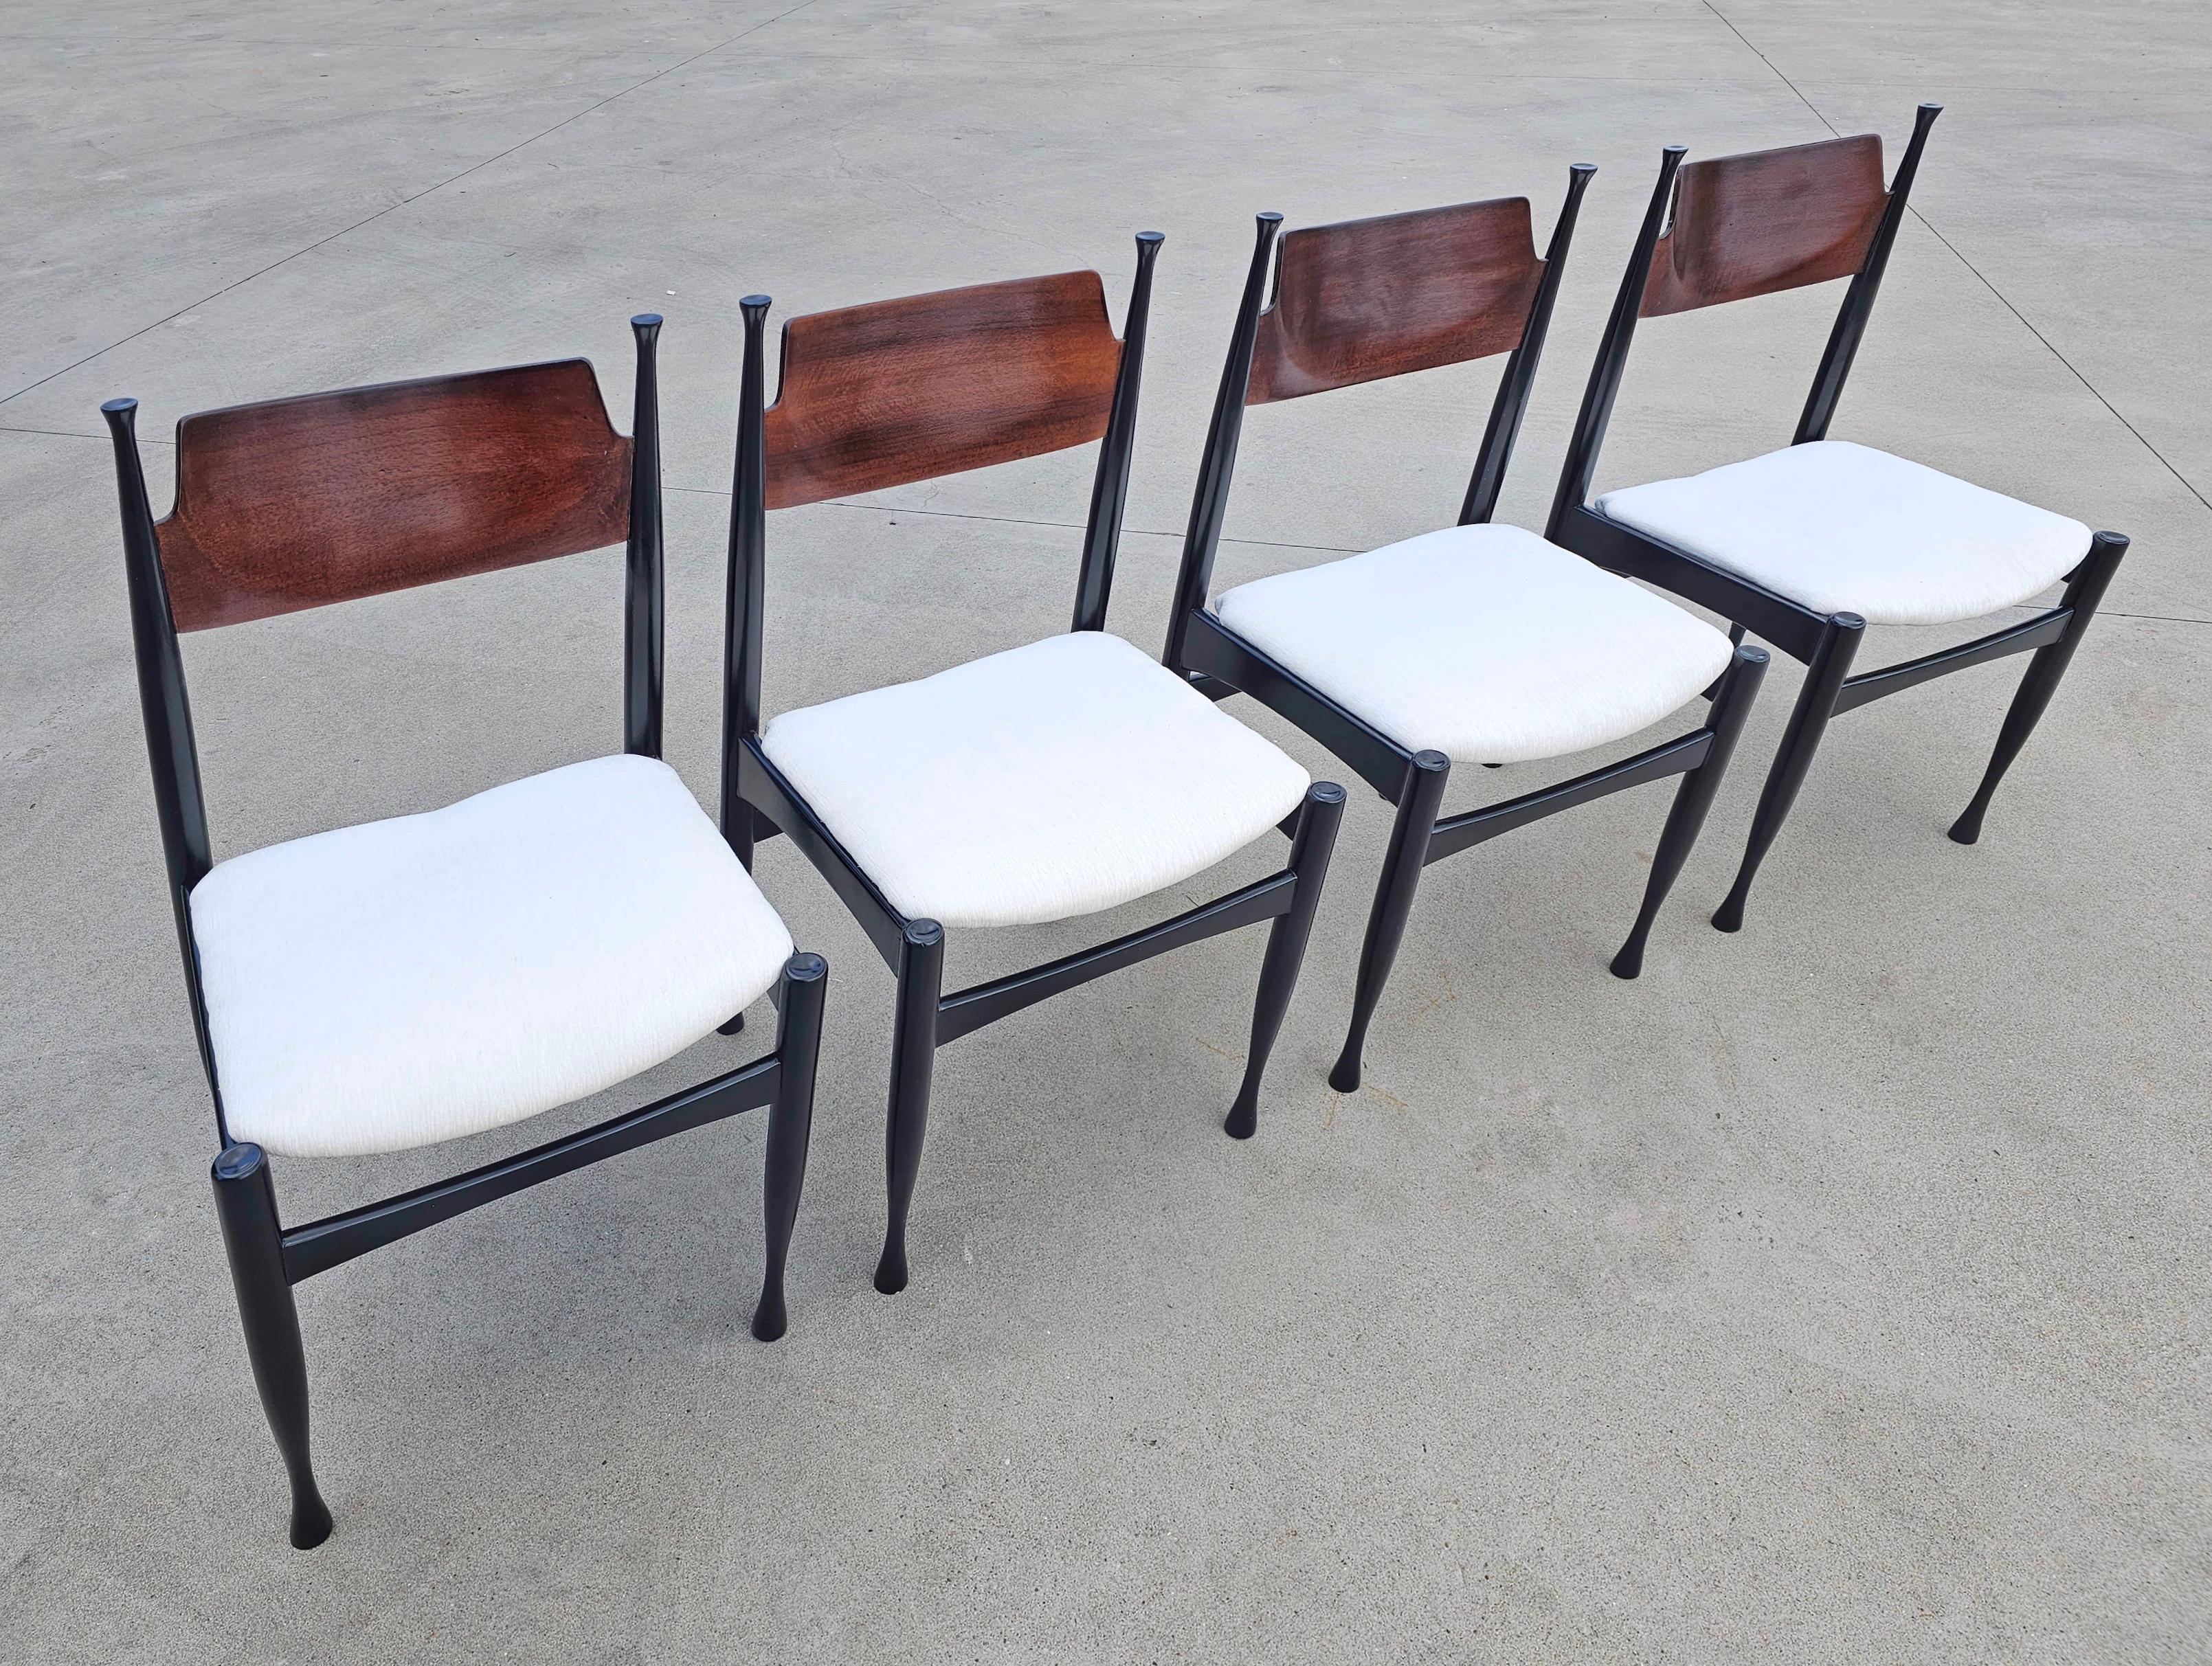 In this listing you will find a gorgeous and very rare set of 4 Mid-Century Modern dining chairs in the style of Paolo Buffa. They feature construction in solid beech wood, painted black, the backrest is done in mahogany plywood, while the seats are